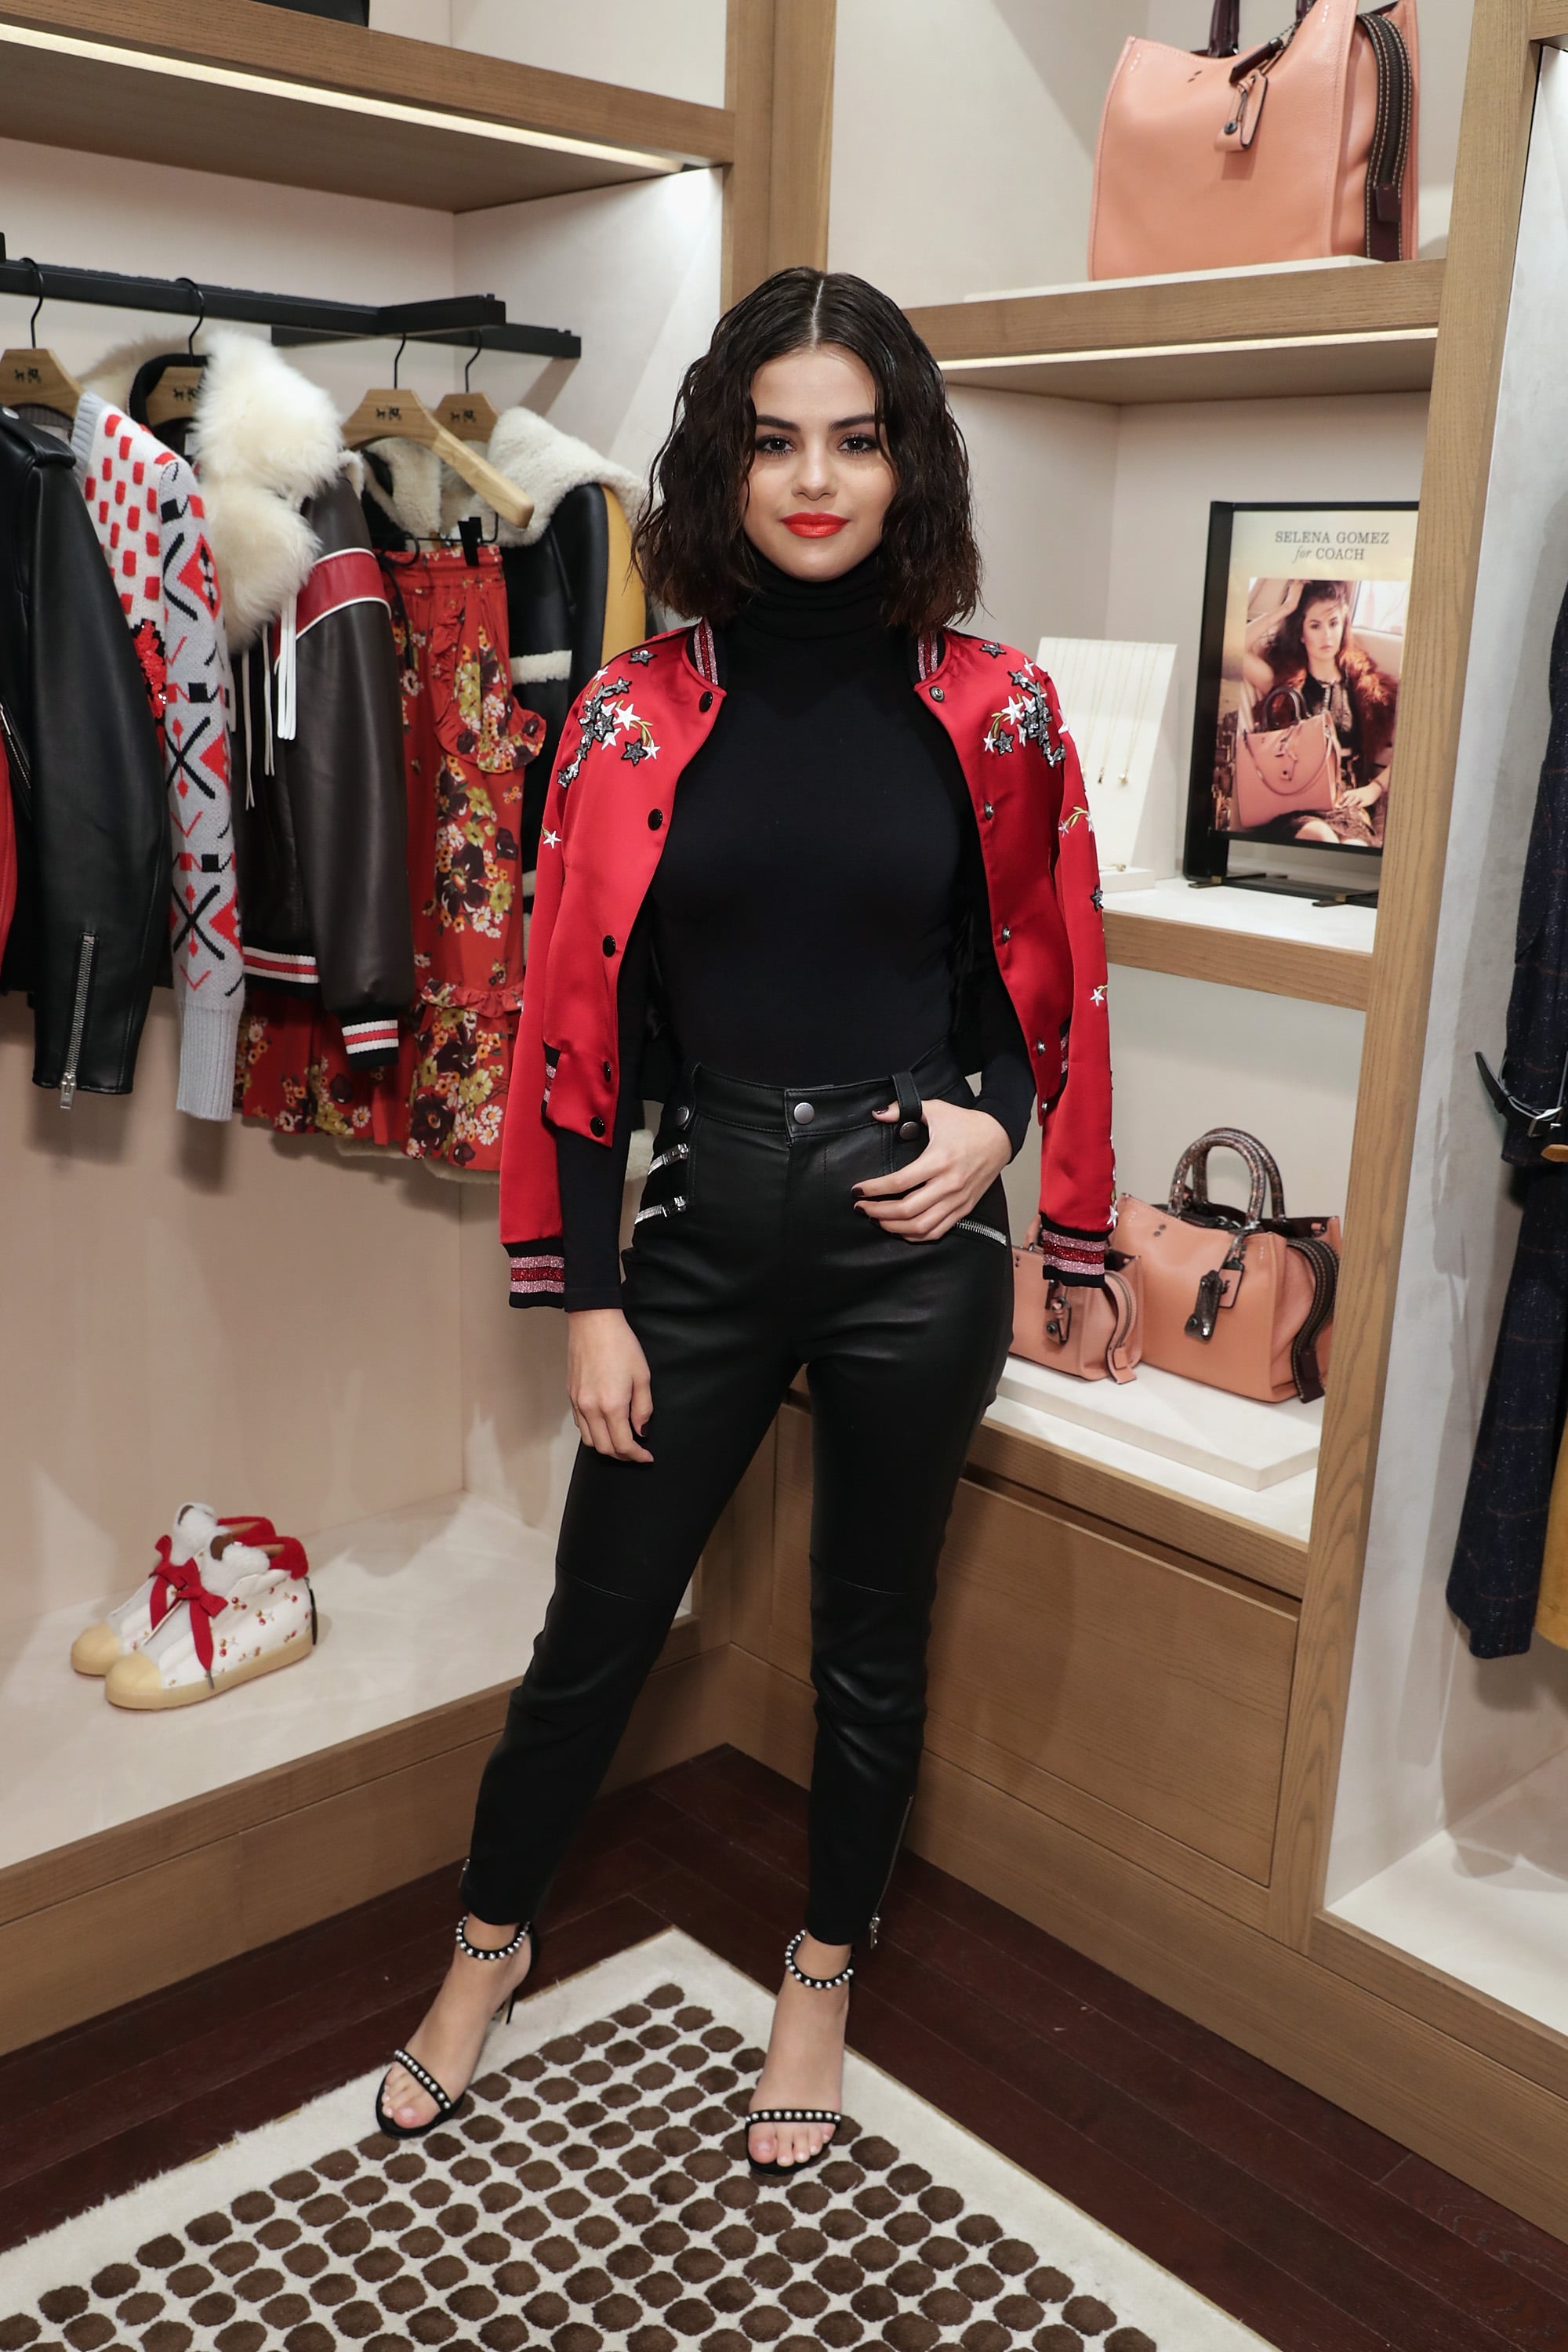 While in NYC, the star made time to stop by the Coach store for an | Selena  Gomez's New York City Wardrobe Is Full of Functional Pieces For Women on  the Go |